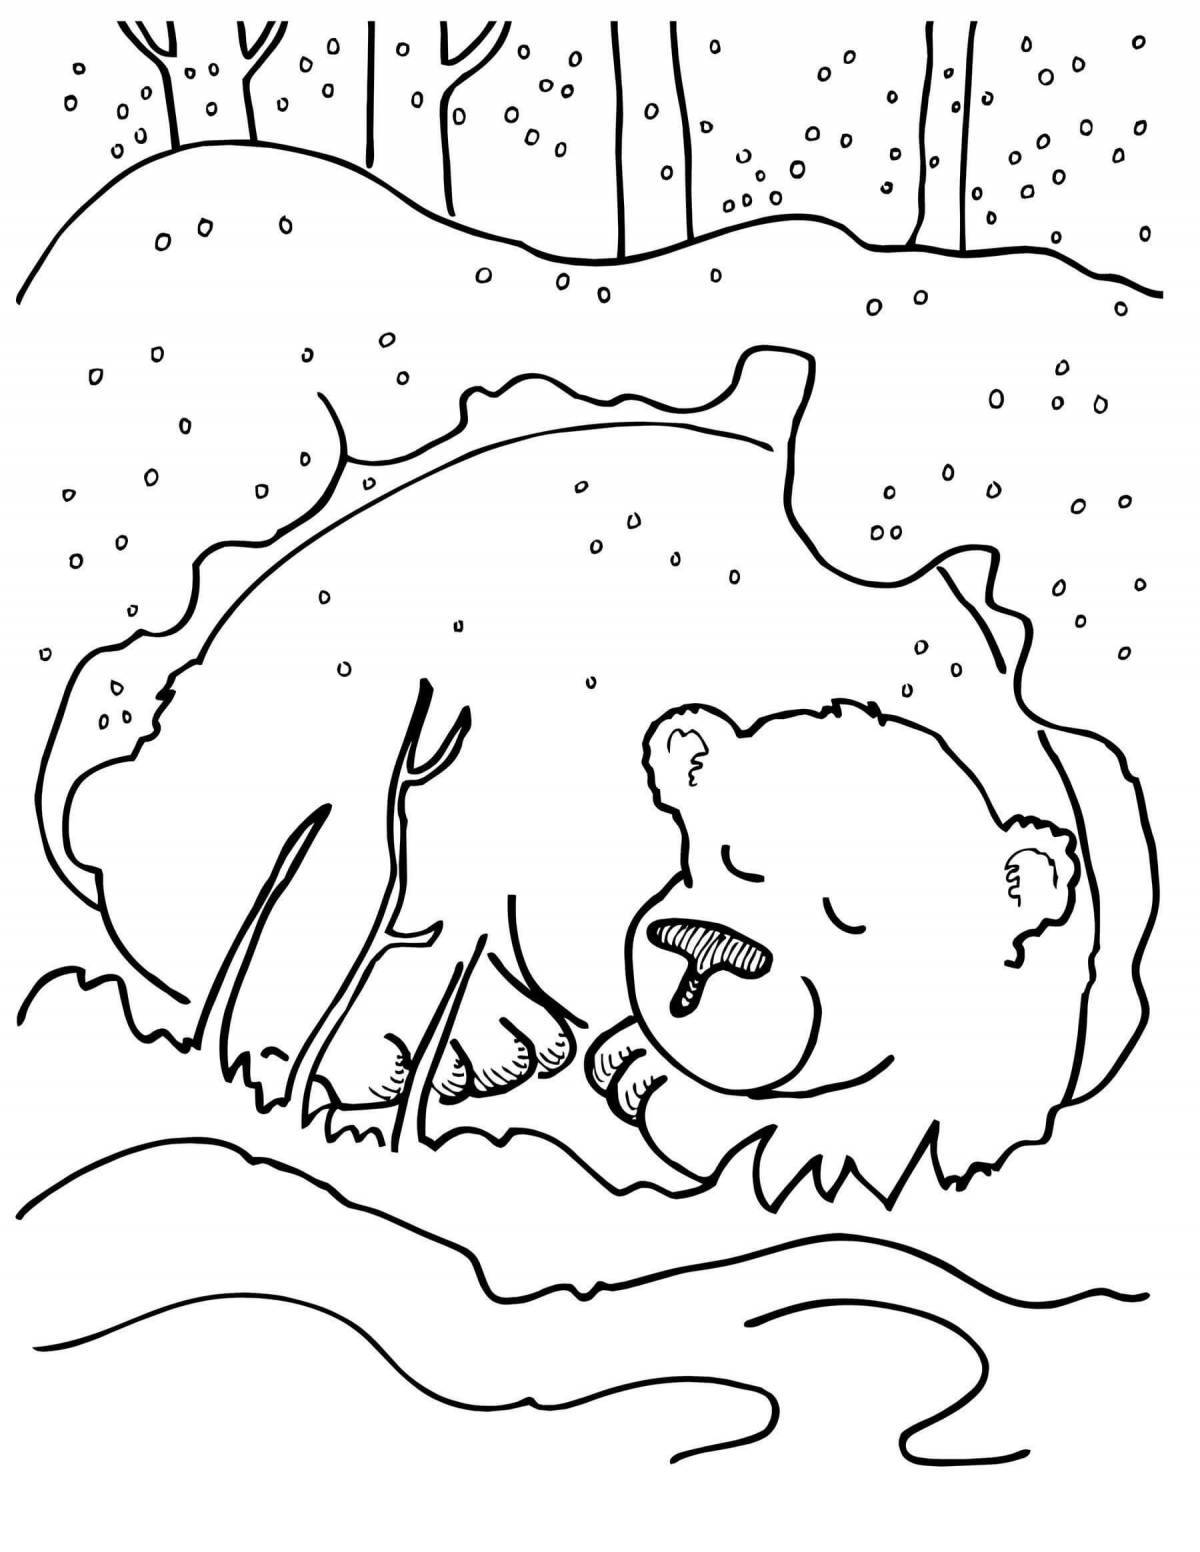 Curious bear in the lair coloring page